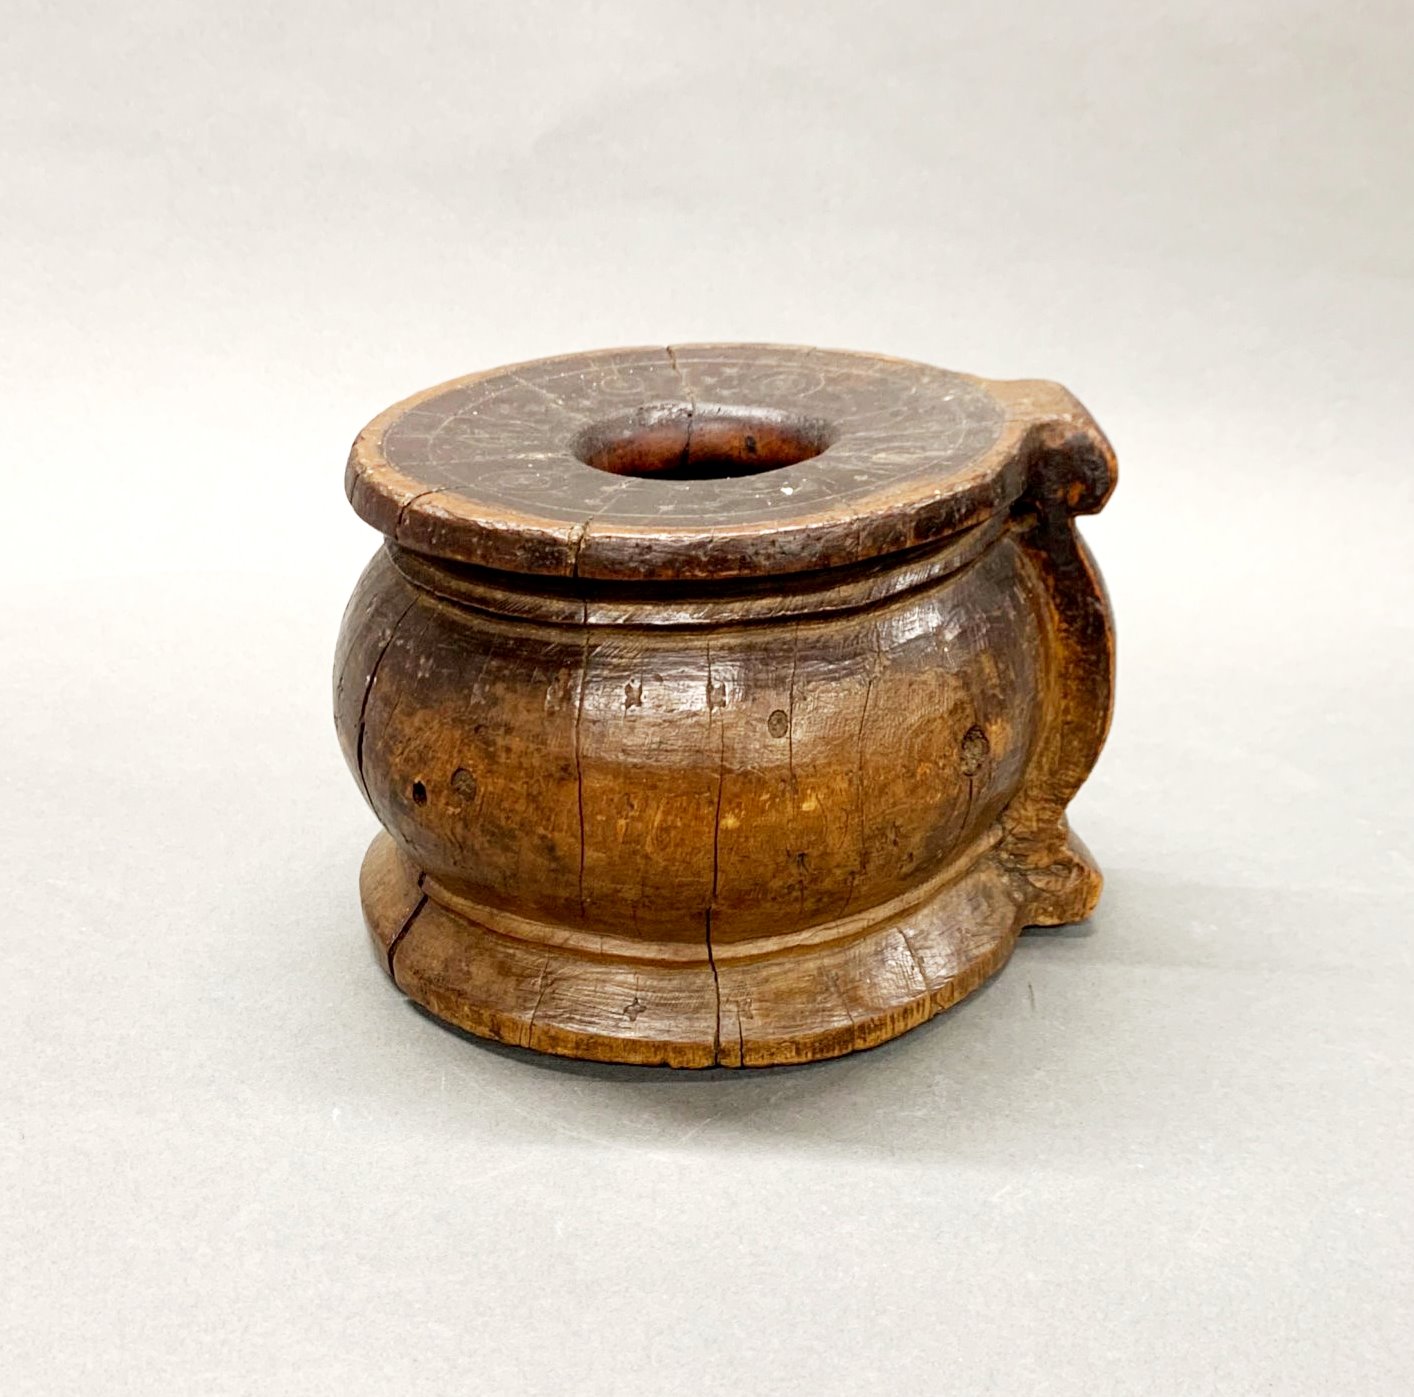 An early (17th / 18th century) wooden mortar, Dia. 20cm, H. 16cm.